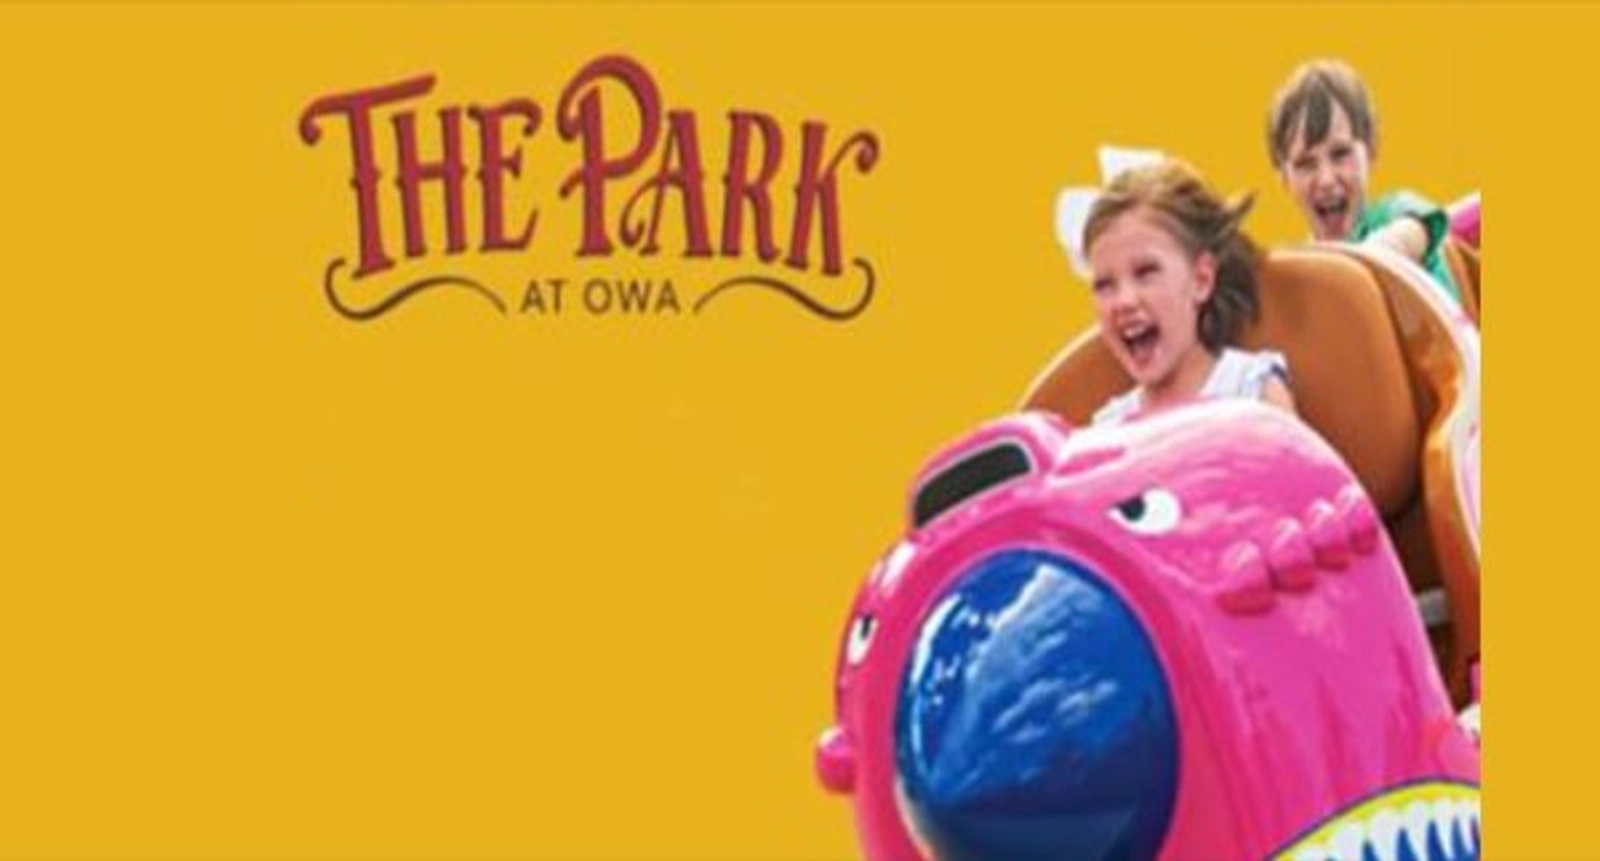  Register now to win Shelby Staycation at OWA!   - Thumbnail Image